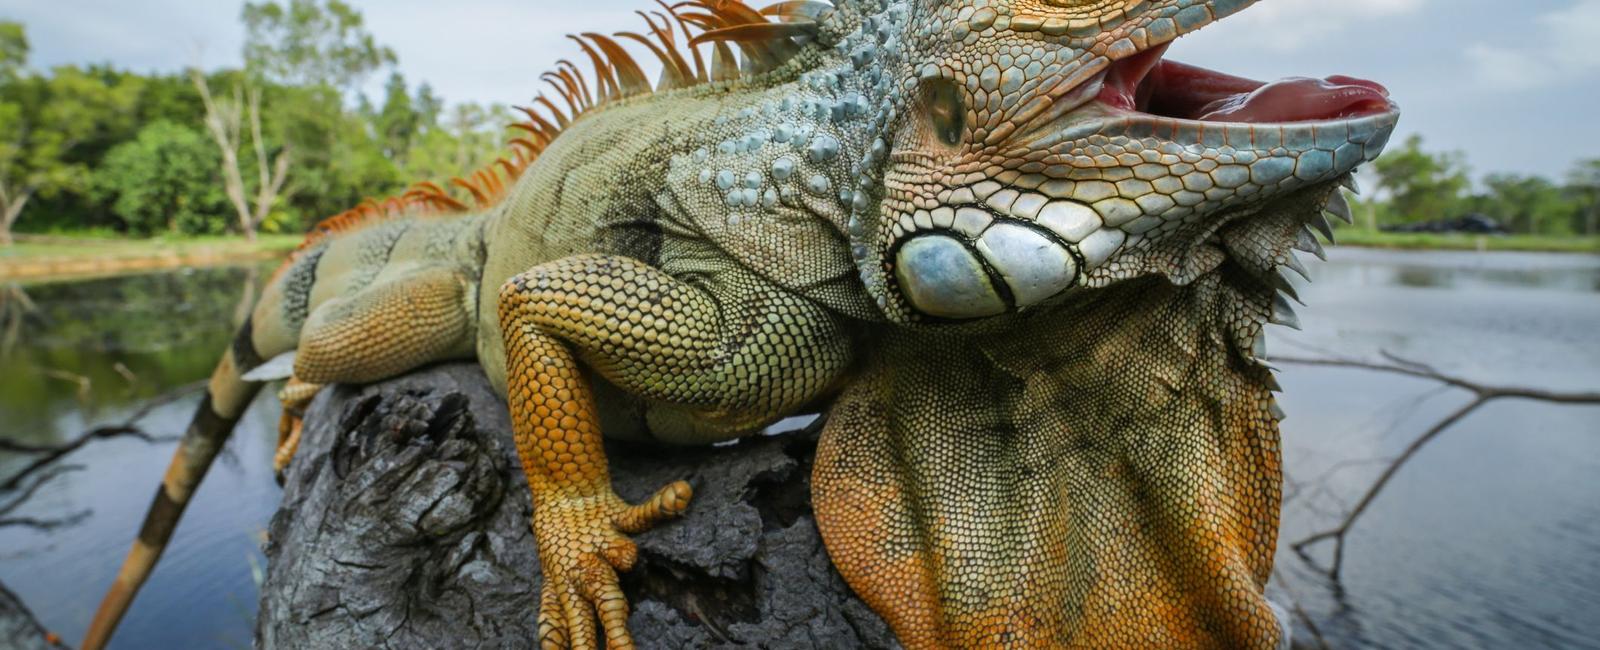 An iguana can stay under water for 28 minutes